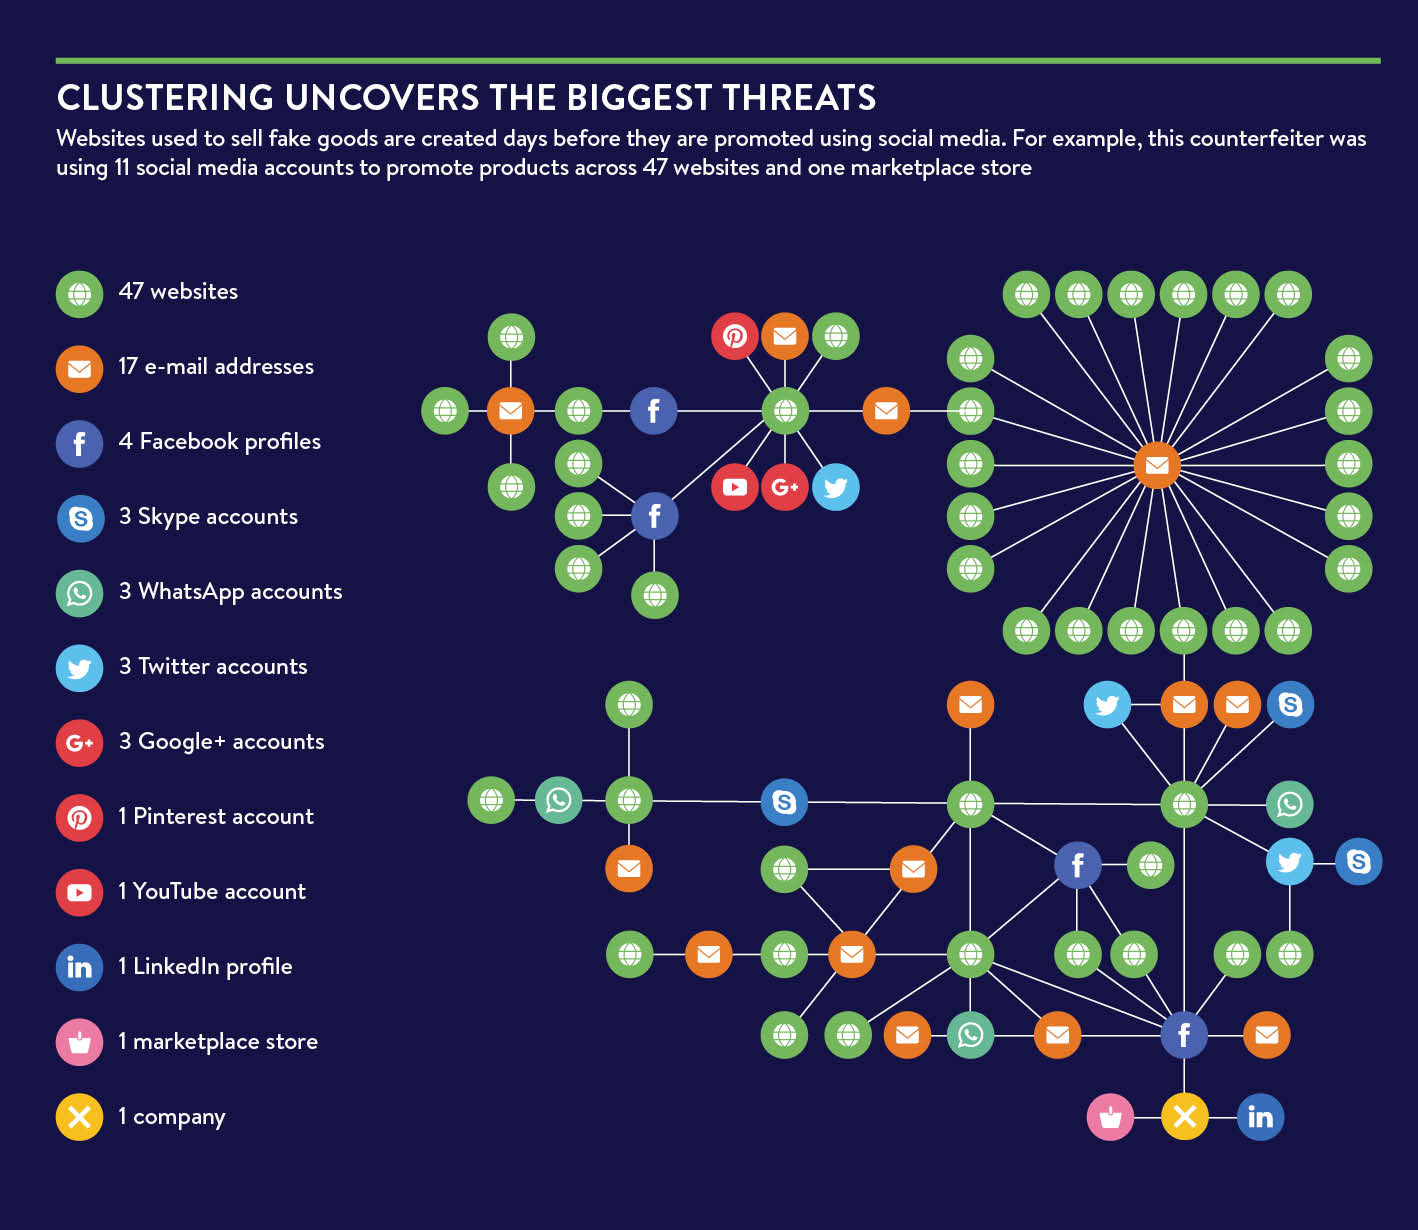 Clustering uncovers the biggest threats